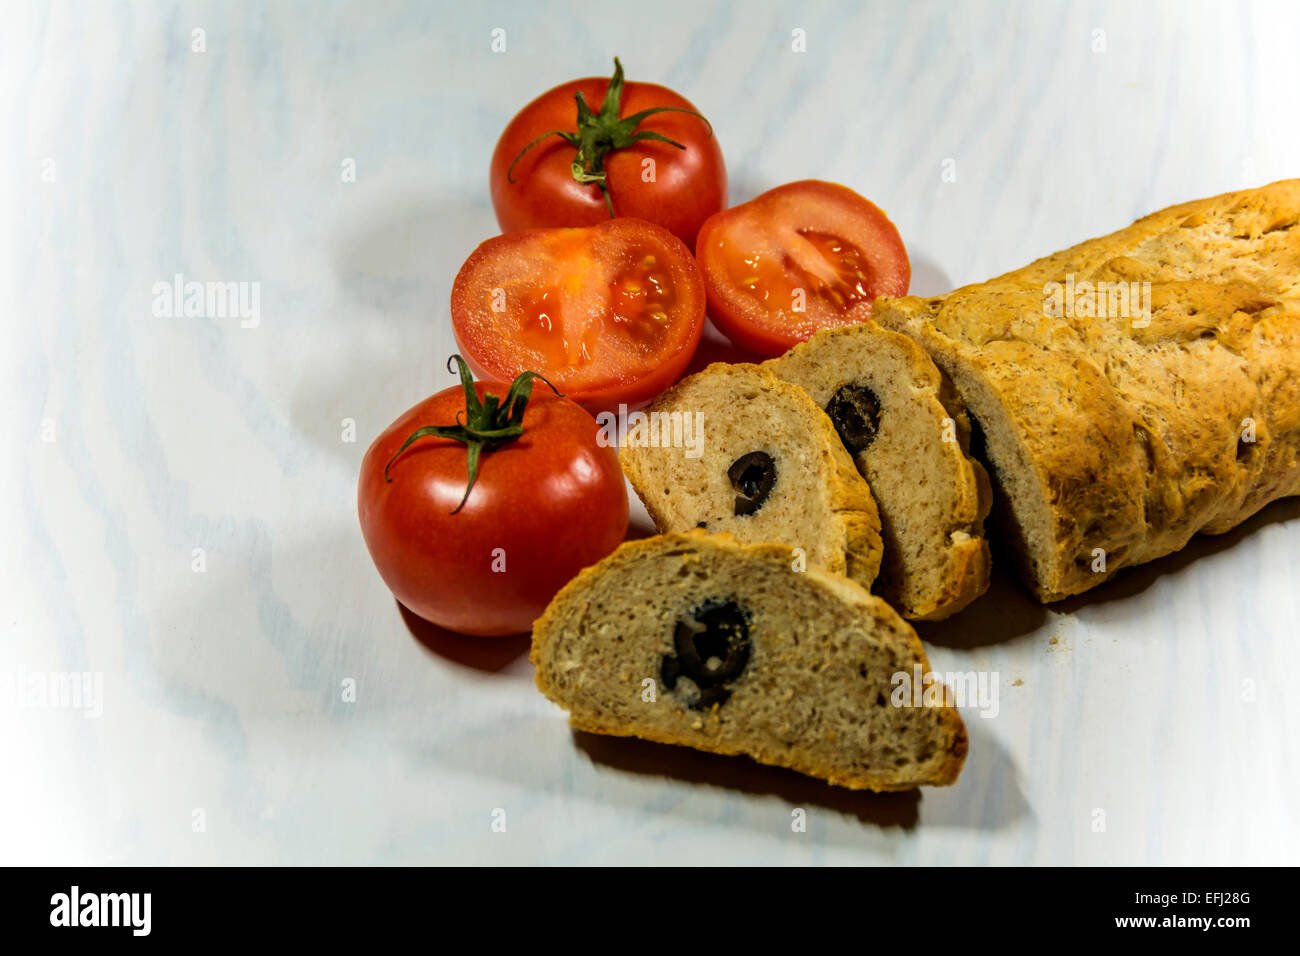 Home made olive bread from an Italian recipe, served with tomatoes. Stock Photo